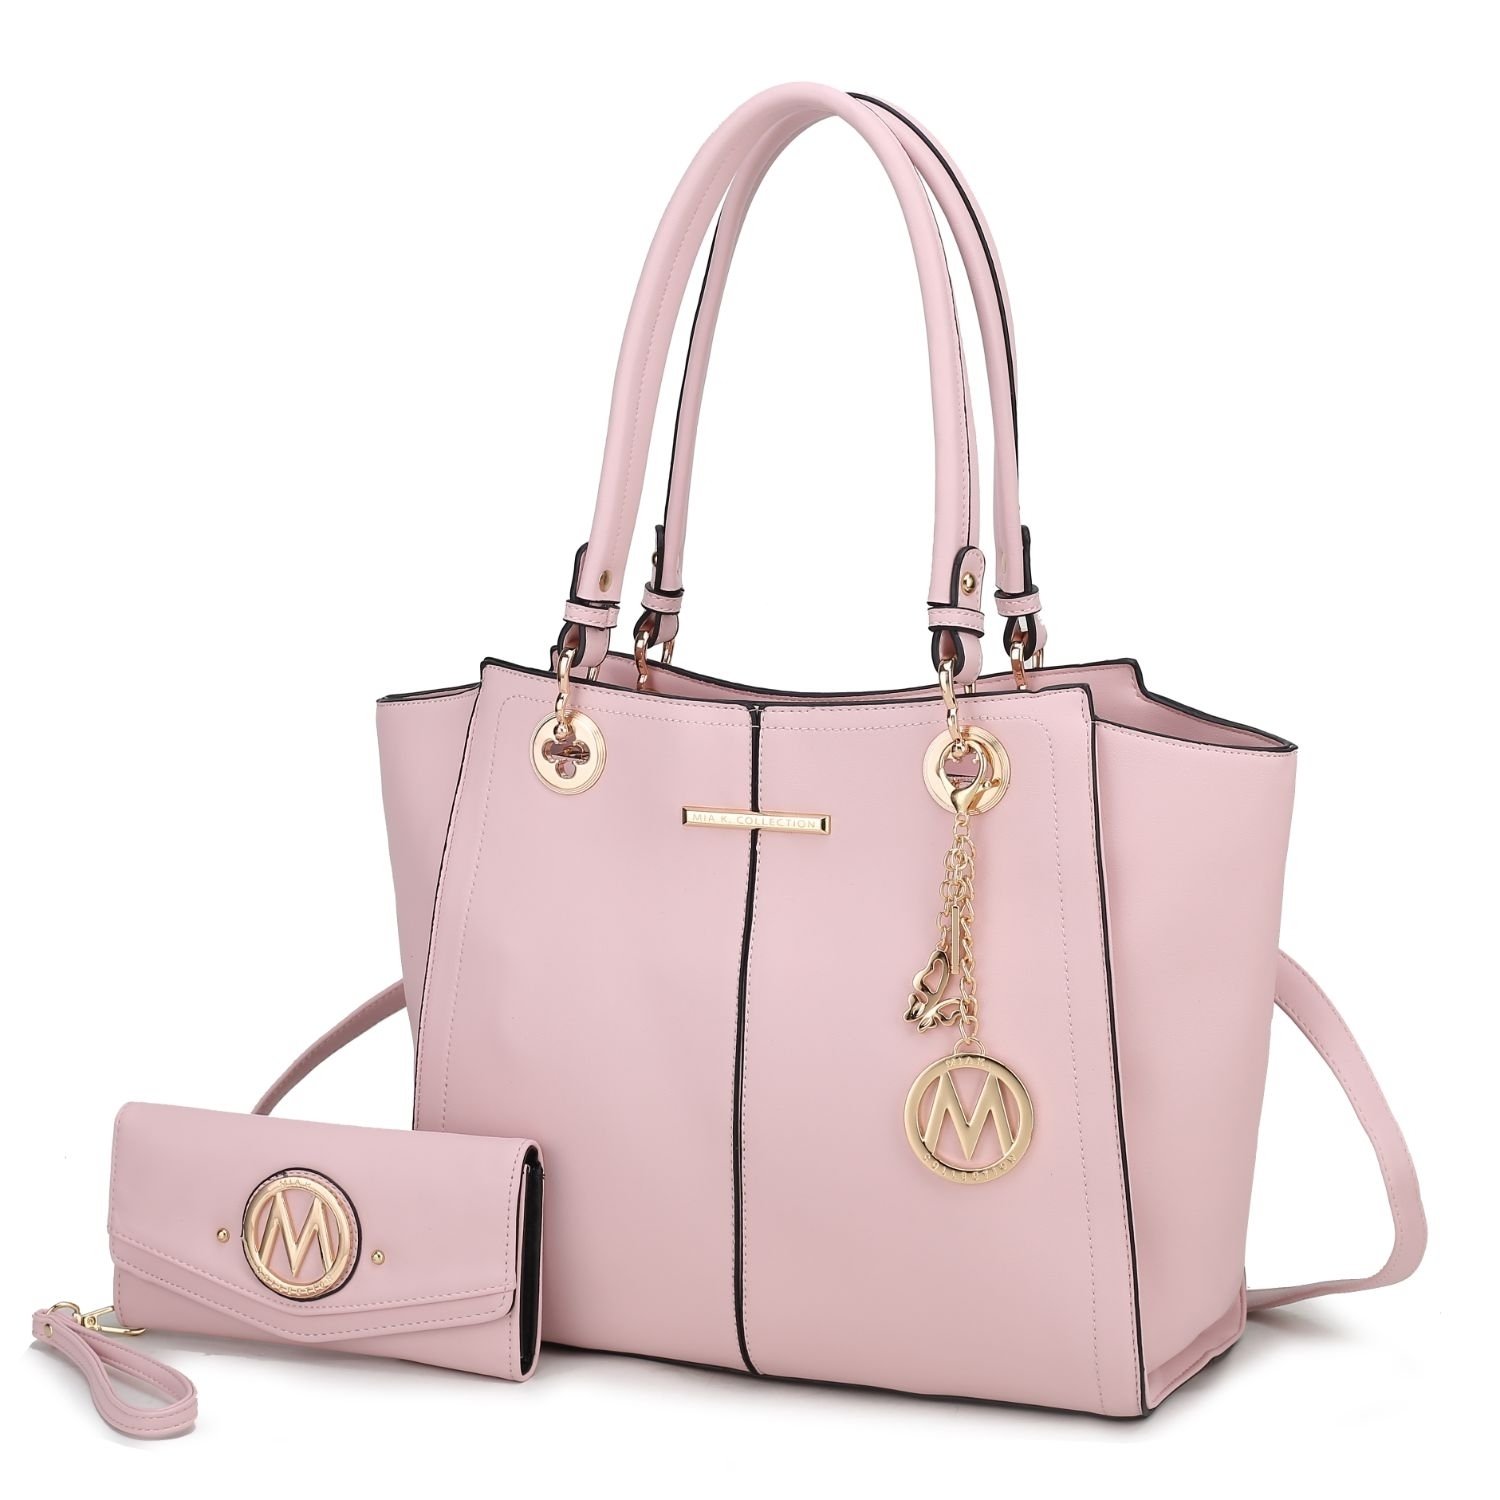 MKF Collection Ivy Vegan Leather Women's Tote Handbag By Mia K With Wallet -2 Pieces - Pink